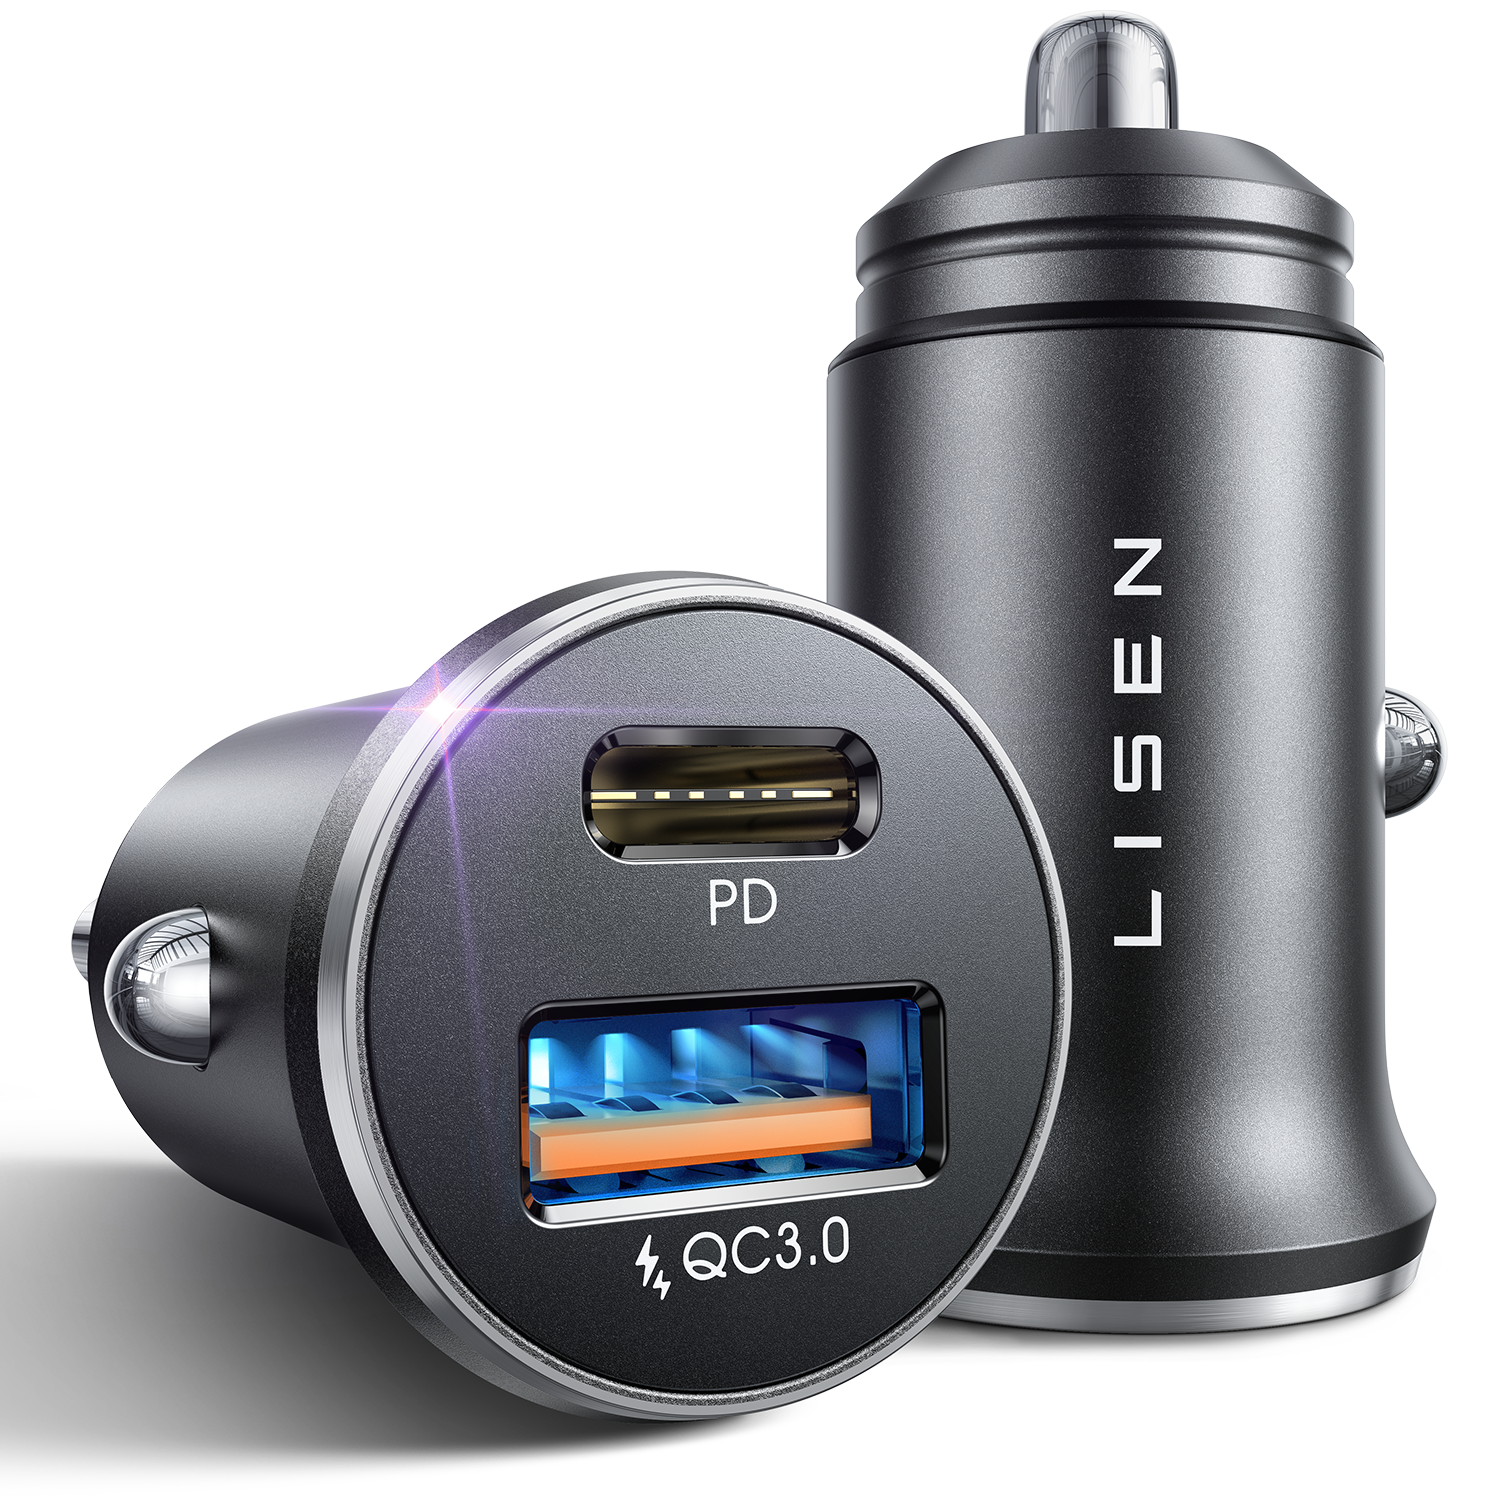 Foxin Fcc-002 Dual Port USB for Car Charger, Charging Adapter, Black